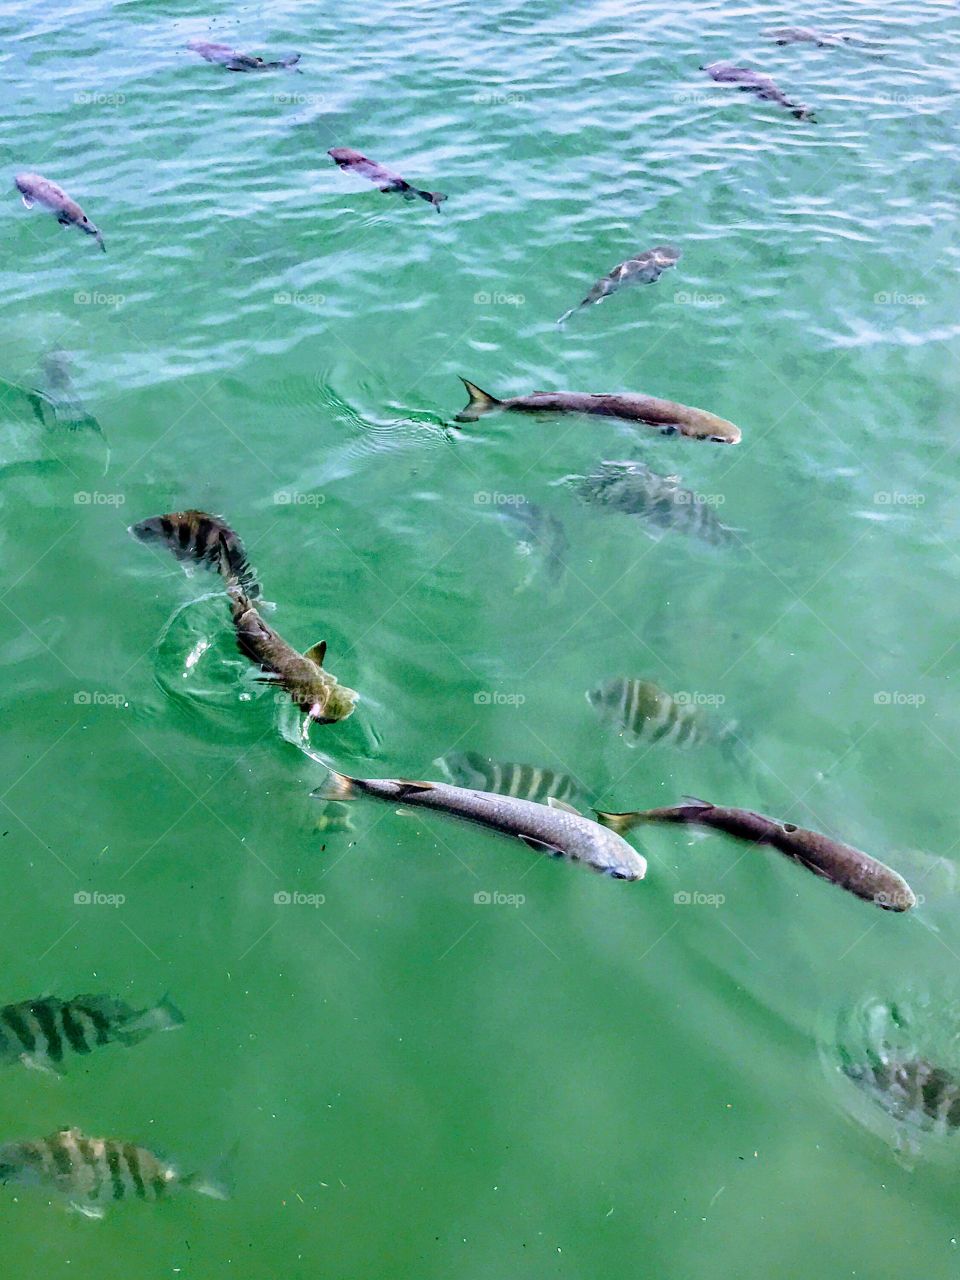 Fishes!!